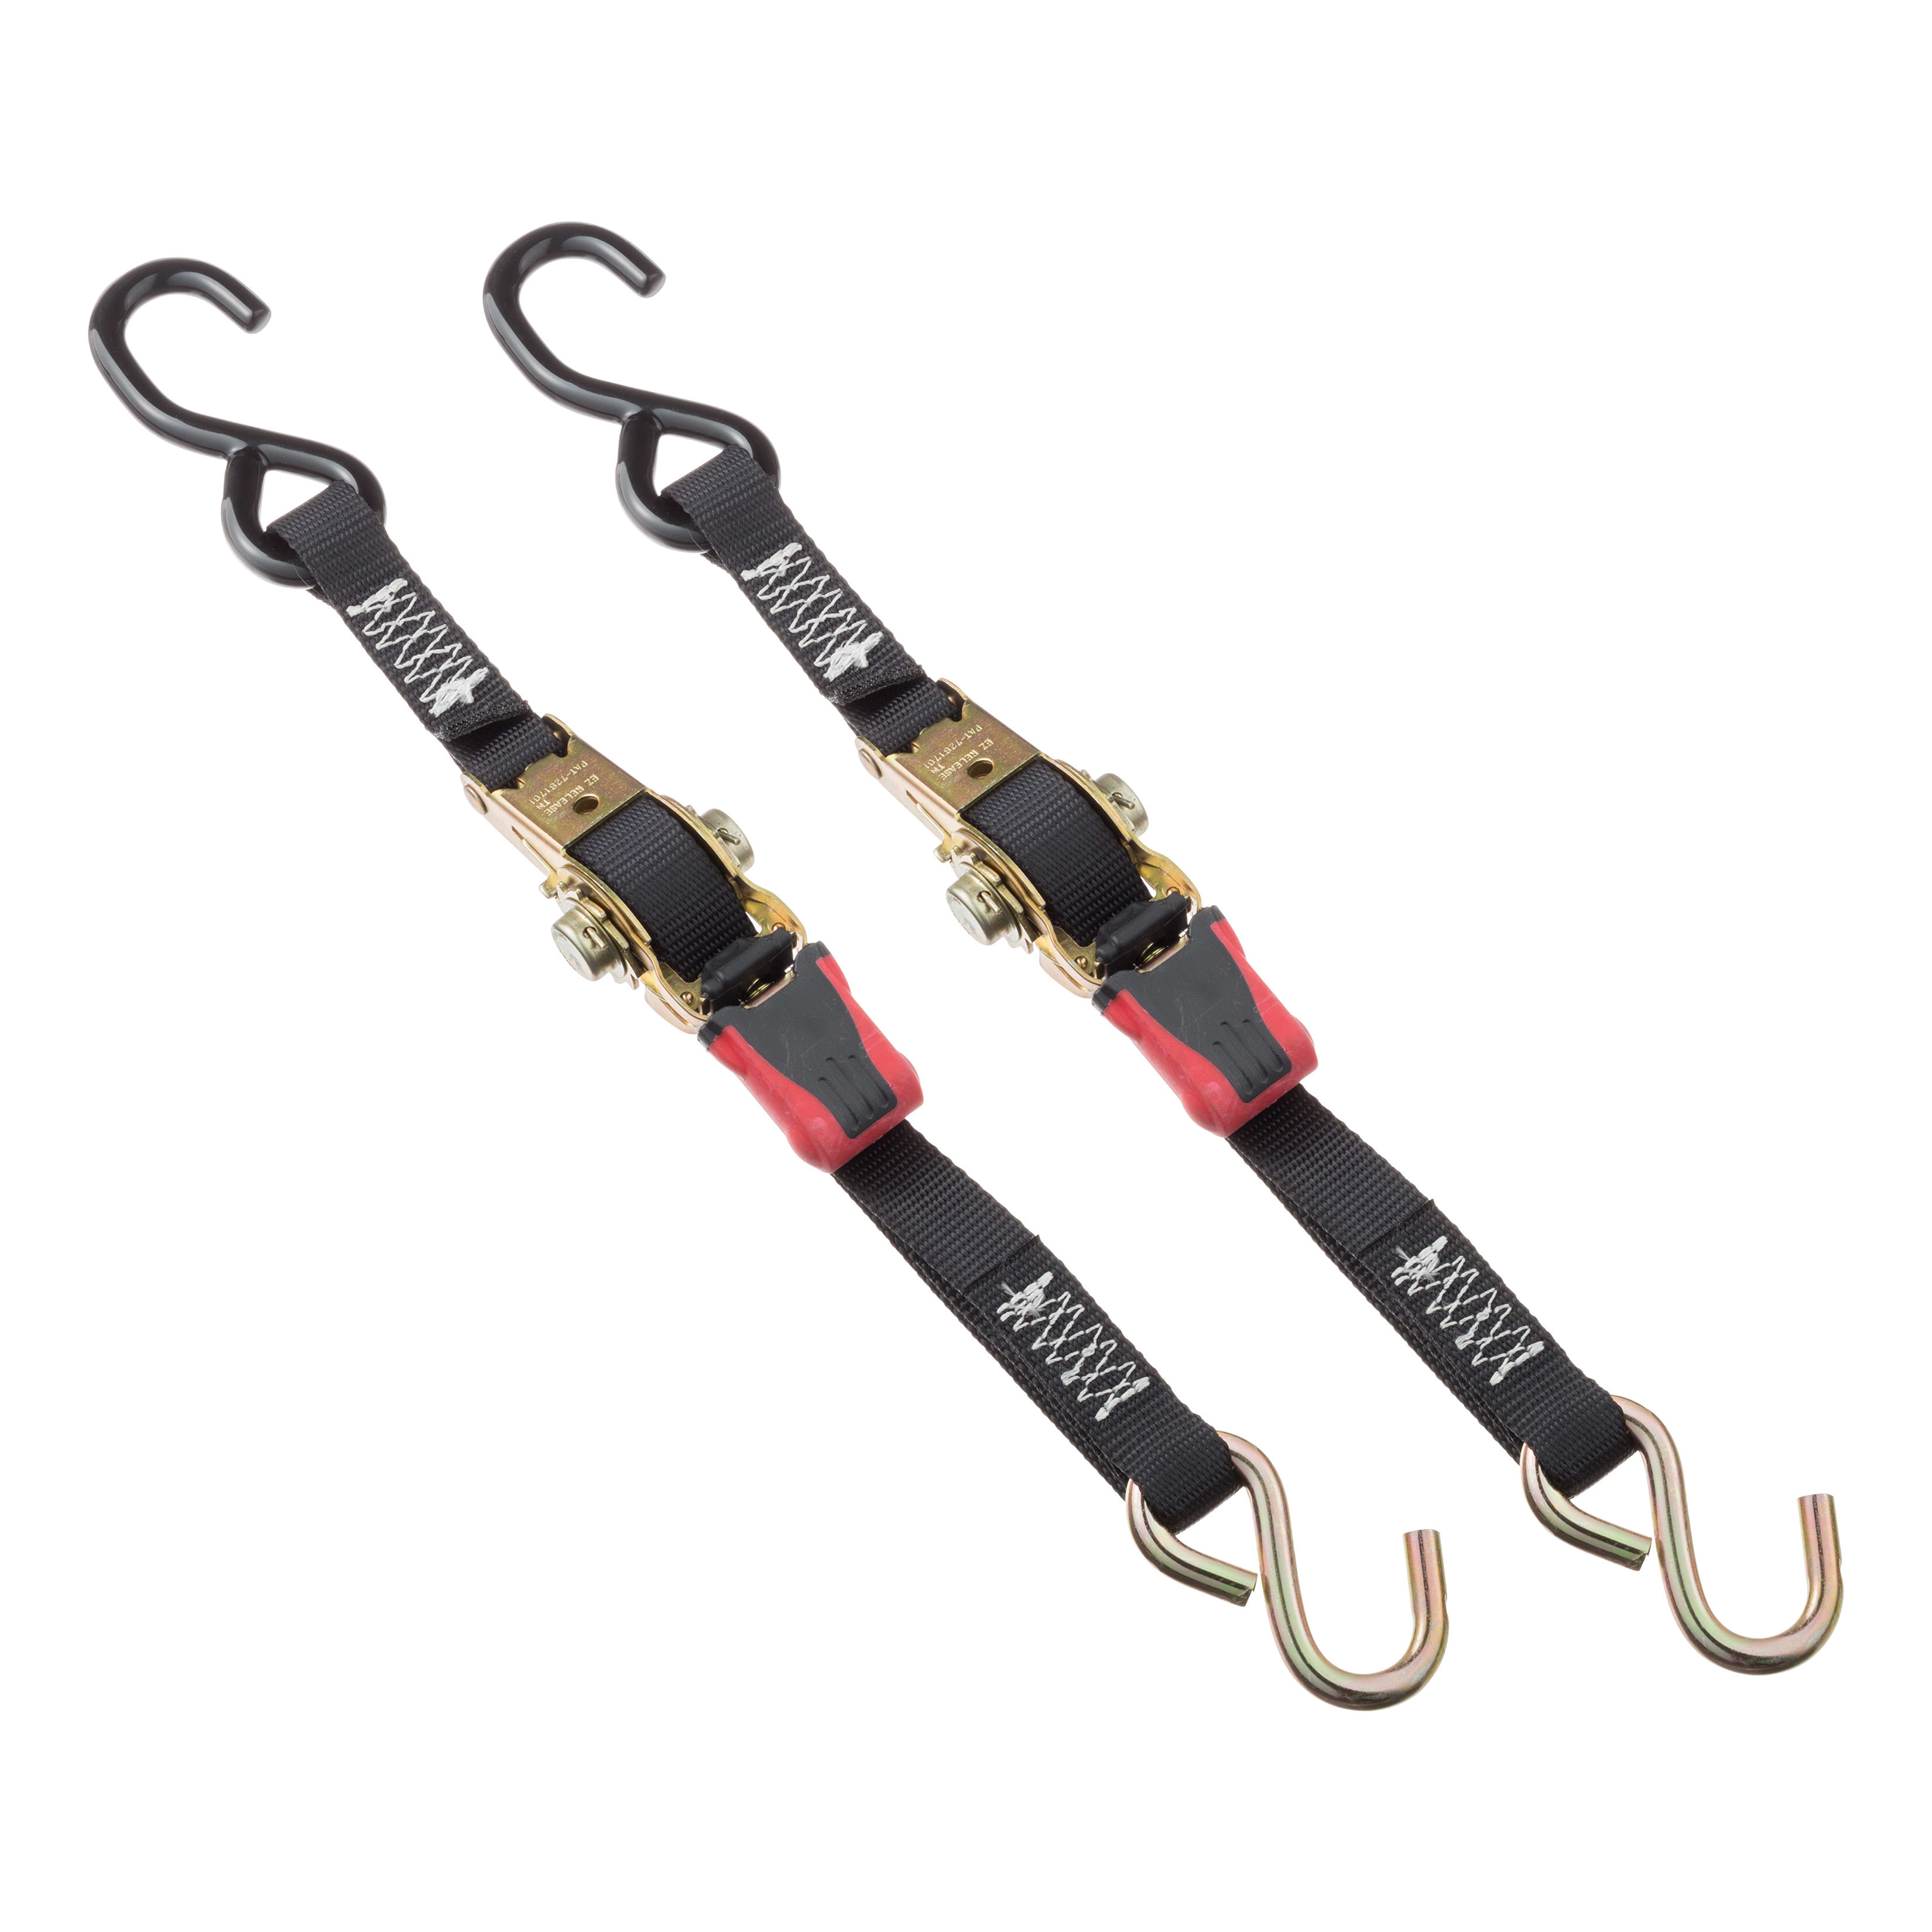 Bass Pro Shops® Ratchet Transom Tie-Downs - Back View